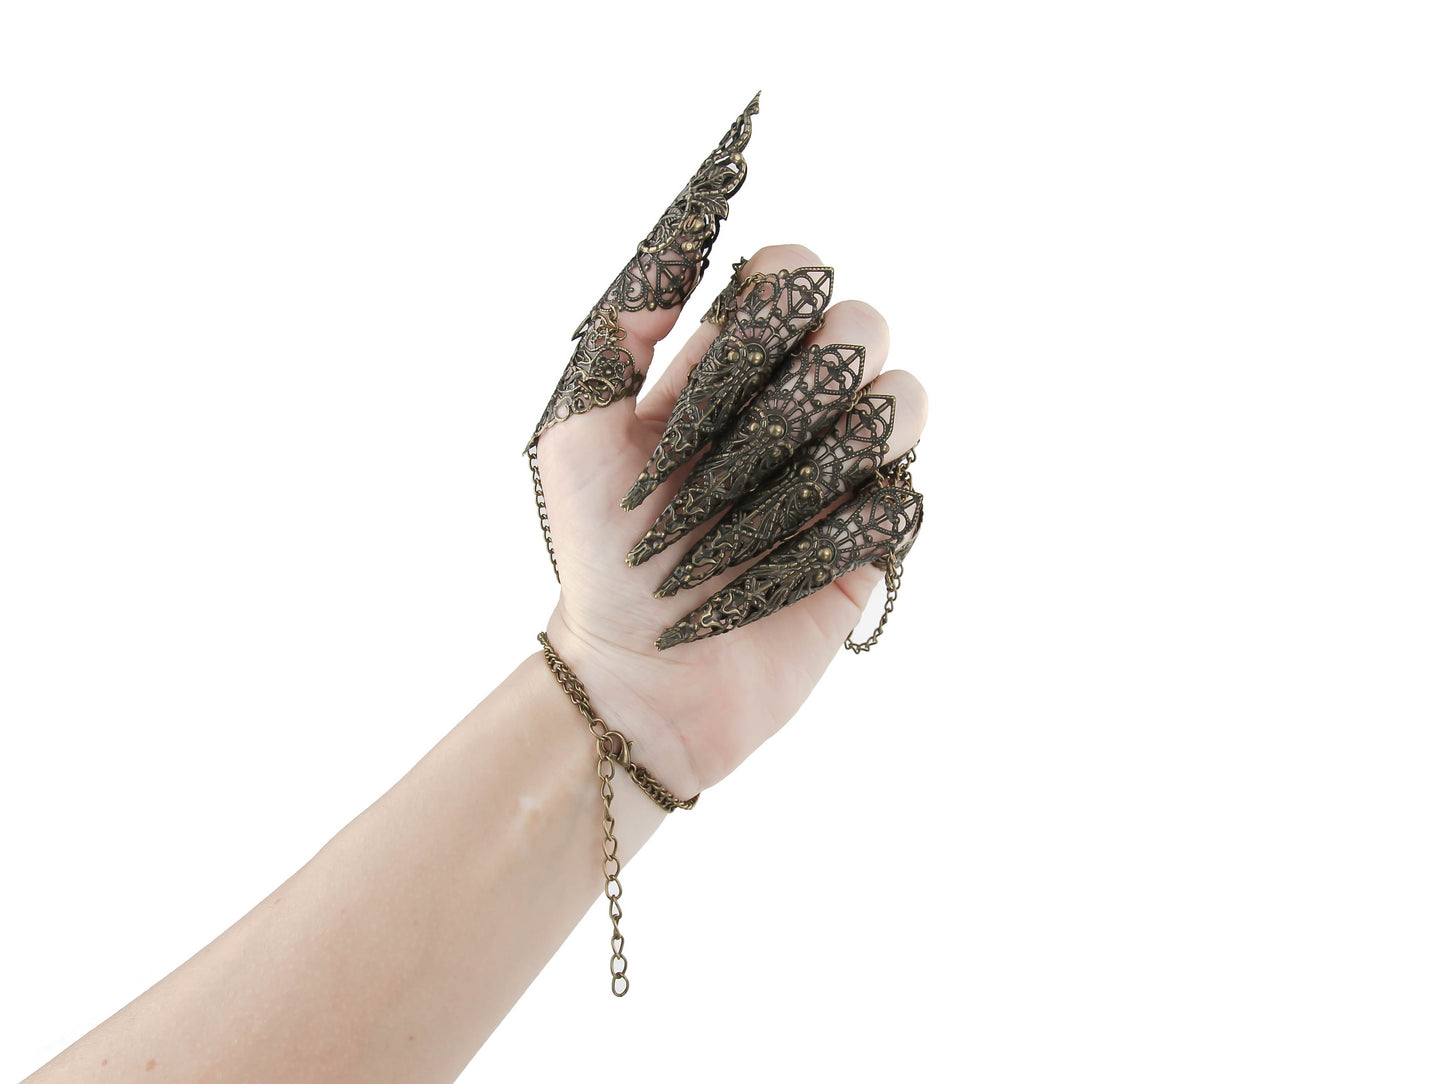 Unleash your inner gothic fashionista with this intricately designed claw glove crafted from delicate bronze filigree. Each finger features a dramatic, clawed tip, making it the perfect accessory for any goth jewelry enthusiast. The addition of chain links and a lace-patterned metalwork adds to the ornate appeal of this unique piece.